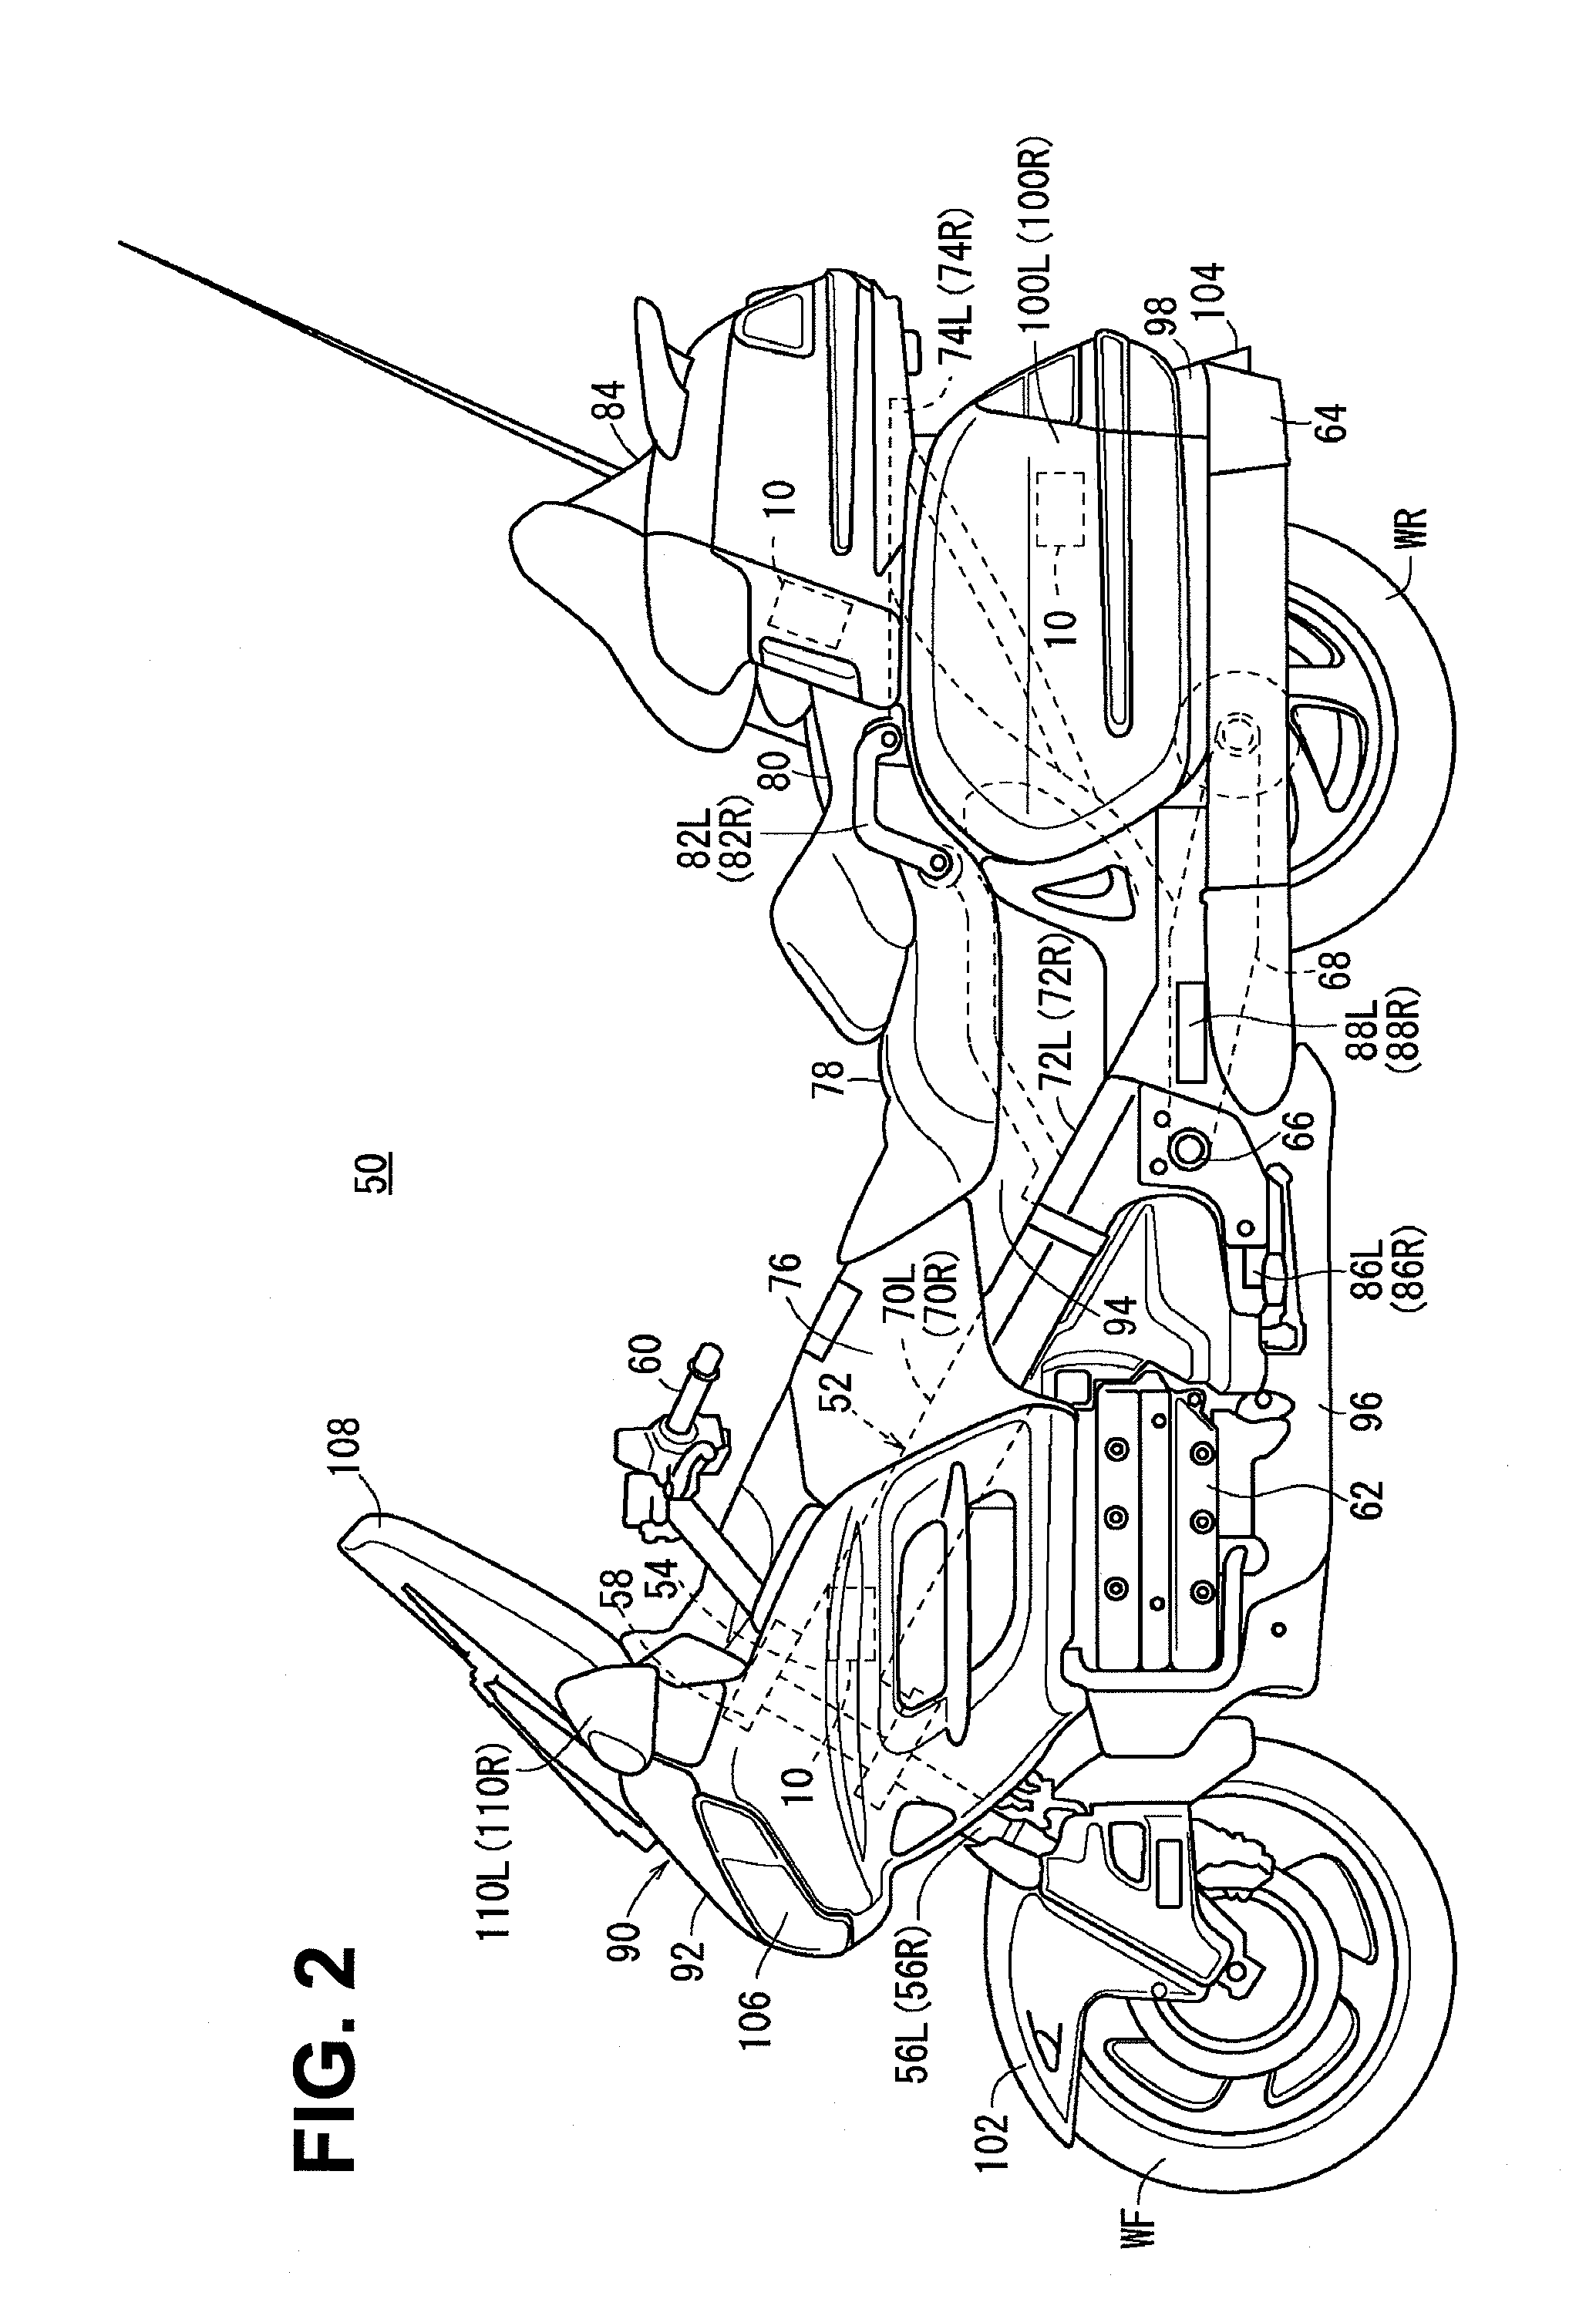 Vehicular audio processing unit and communication system including same